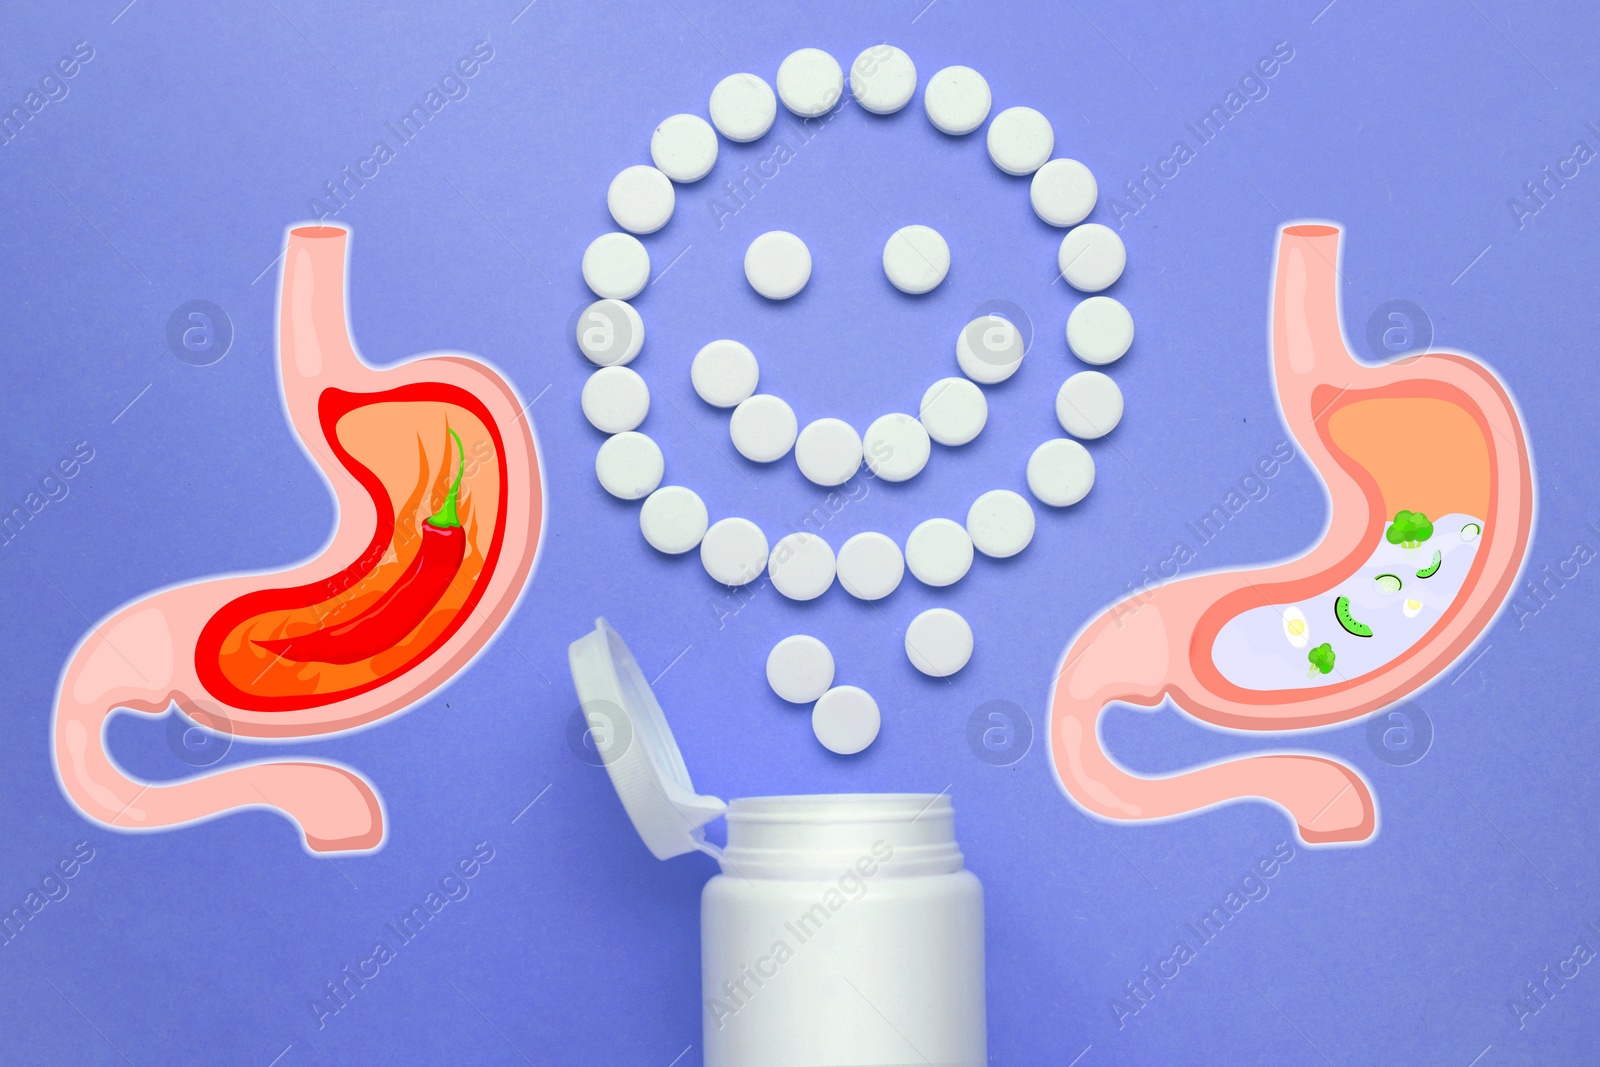 Image of Antacid pills for heartburn, happy face made of medications symbolizing result of treatment on color background, flat lay. Chili pepper on fire as acid indigestion and nutrient products in water as healthy condition, stomach illustrations